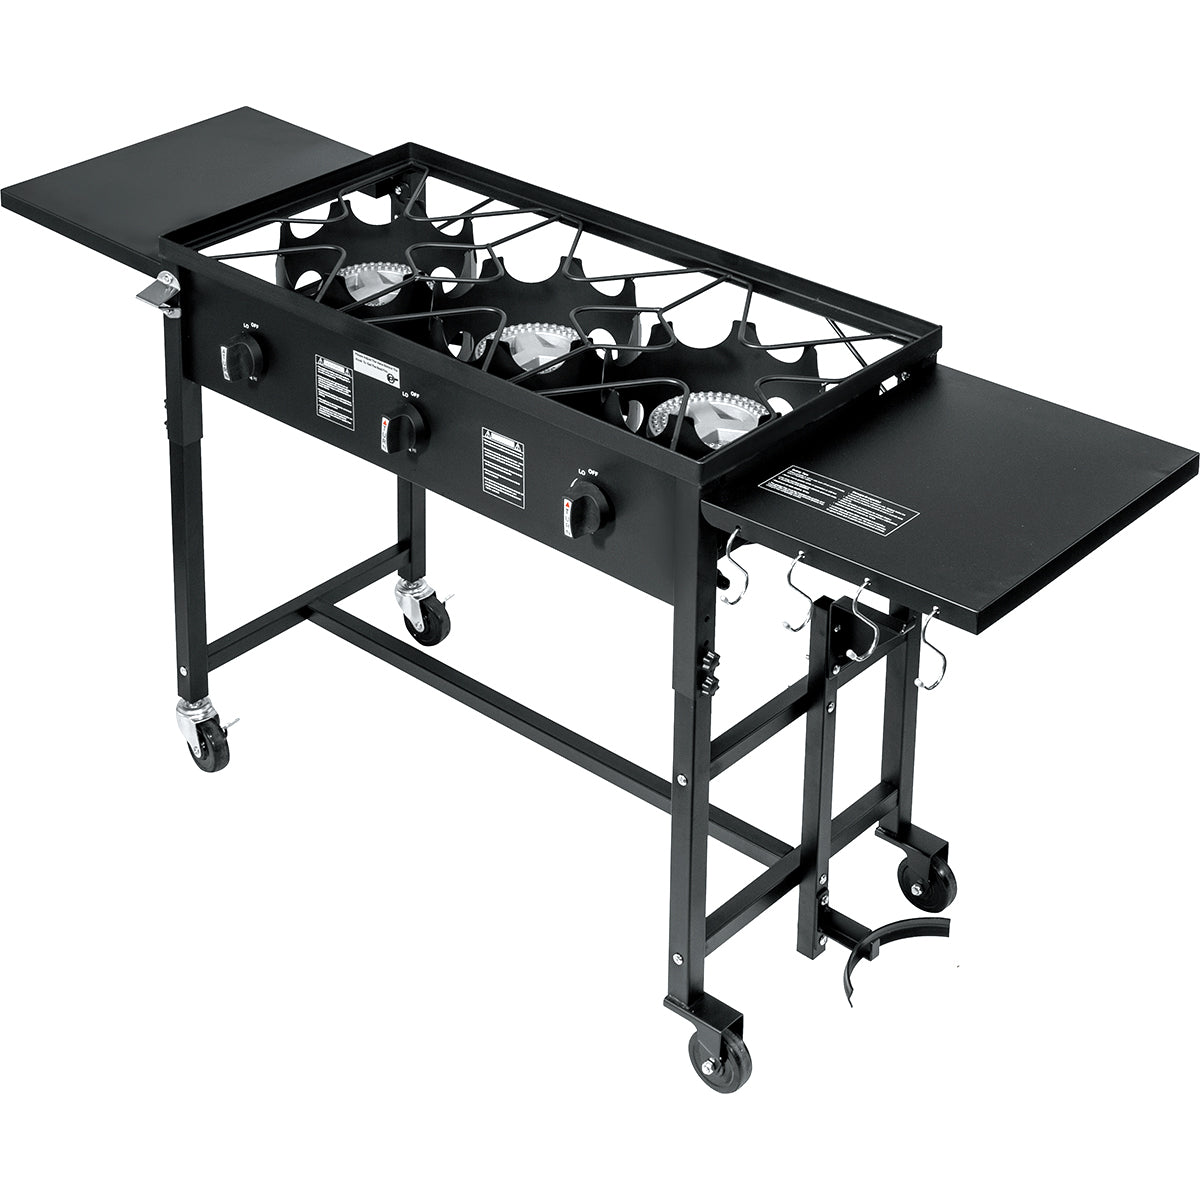 Triple-Burner Stove 87,000 BTU Outdoor Camping Propane Cooking Station –  XtremepowerUS